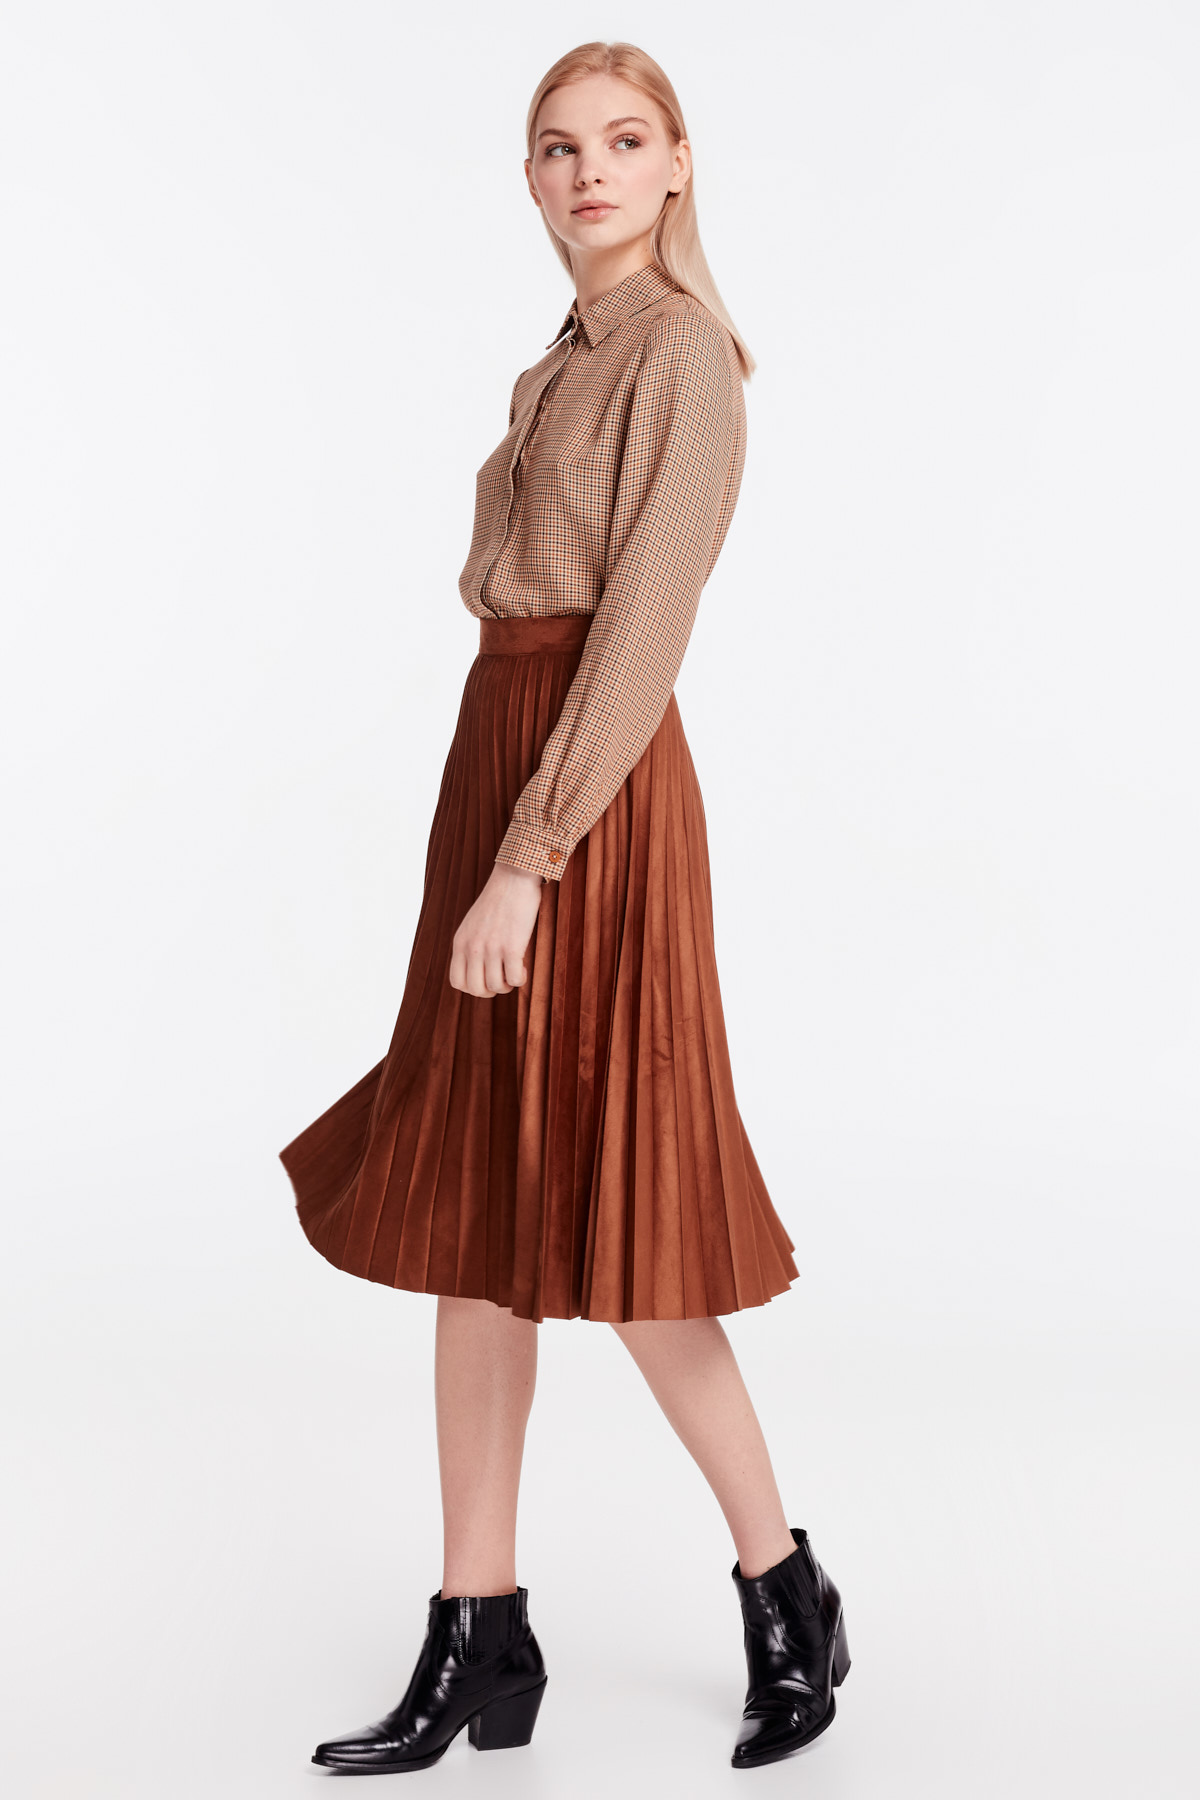 Brown suede pleated skirt, photo 4